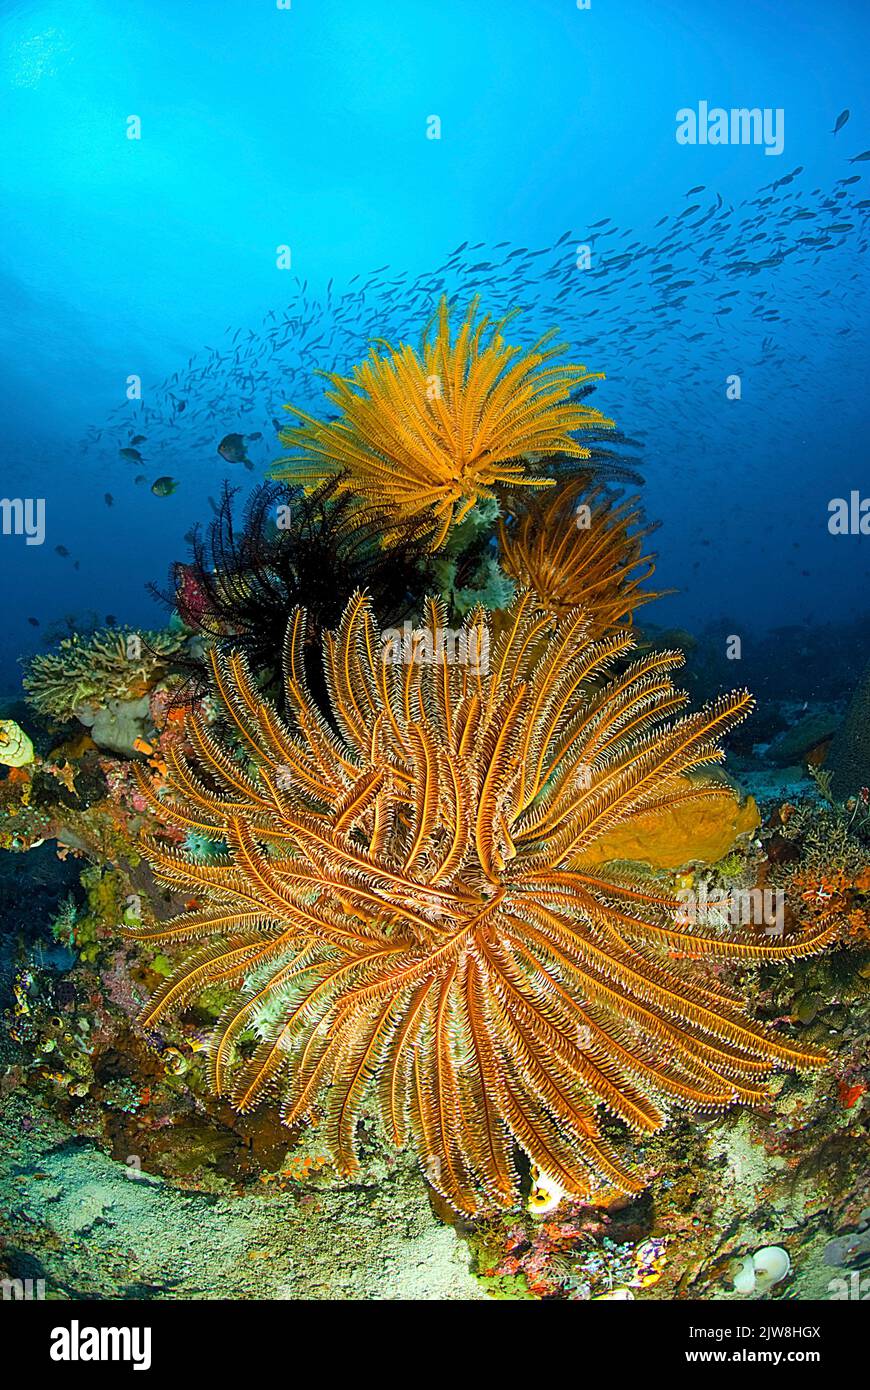 This crinoid, also known as a feather star (Comatulida), unfolds to filter plankton, Raja Ampat, Indonesia, Pacific Ocan Stock Photo